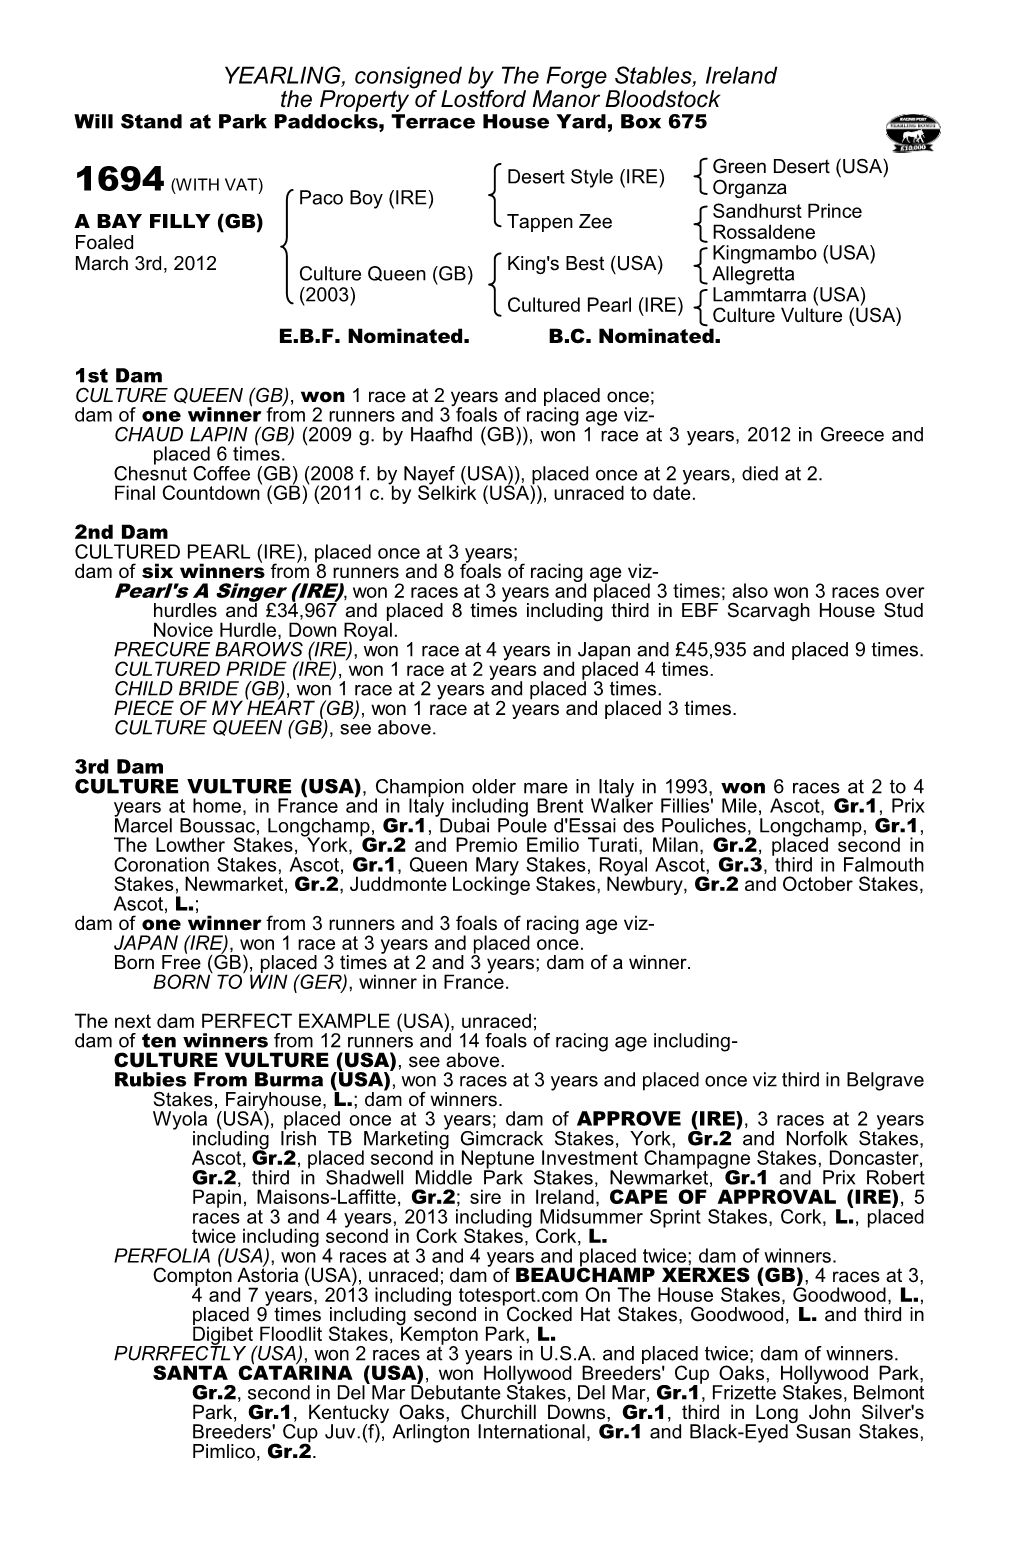 YEARLING, Consigned by the Forge Stables, Ireland the Property of Lostford Manor Bloodstock Will Stand at Park Paddocks, Terrace House Yard, Box 675